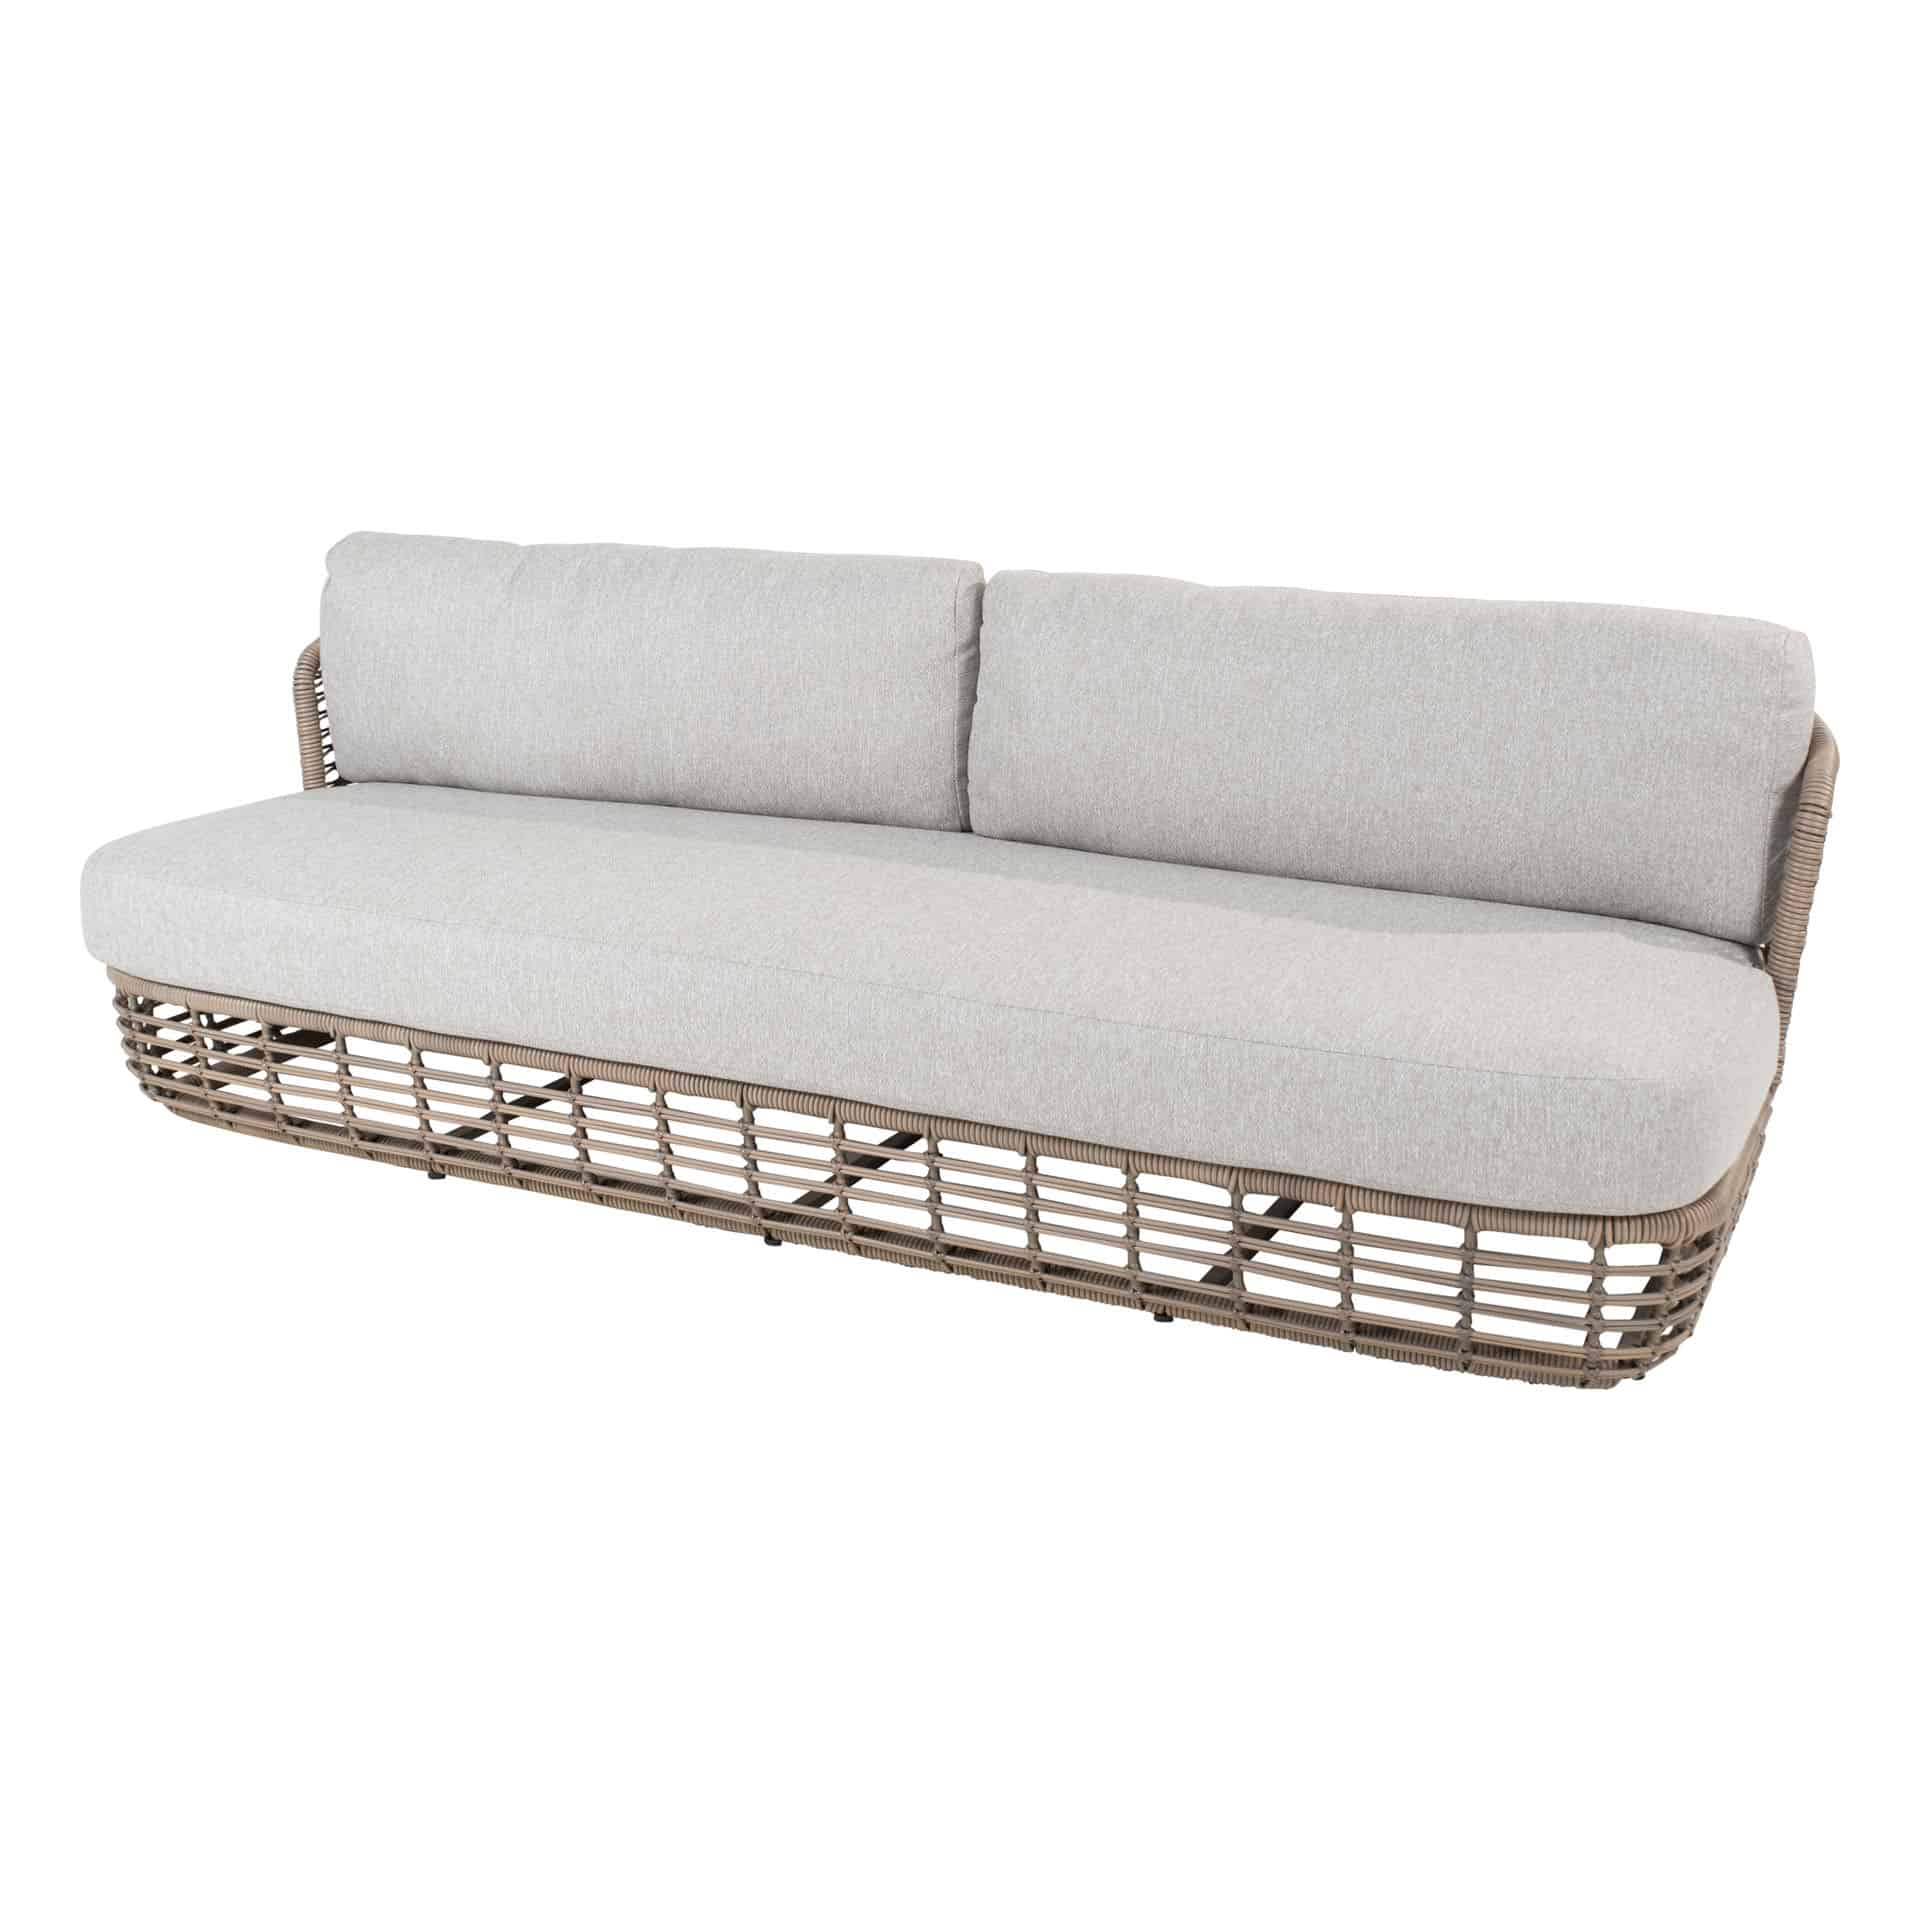 213920_-Lugano-living-bench-3-seater-pure-with-5-cushions-01